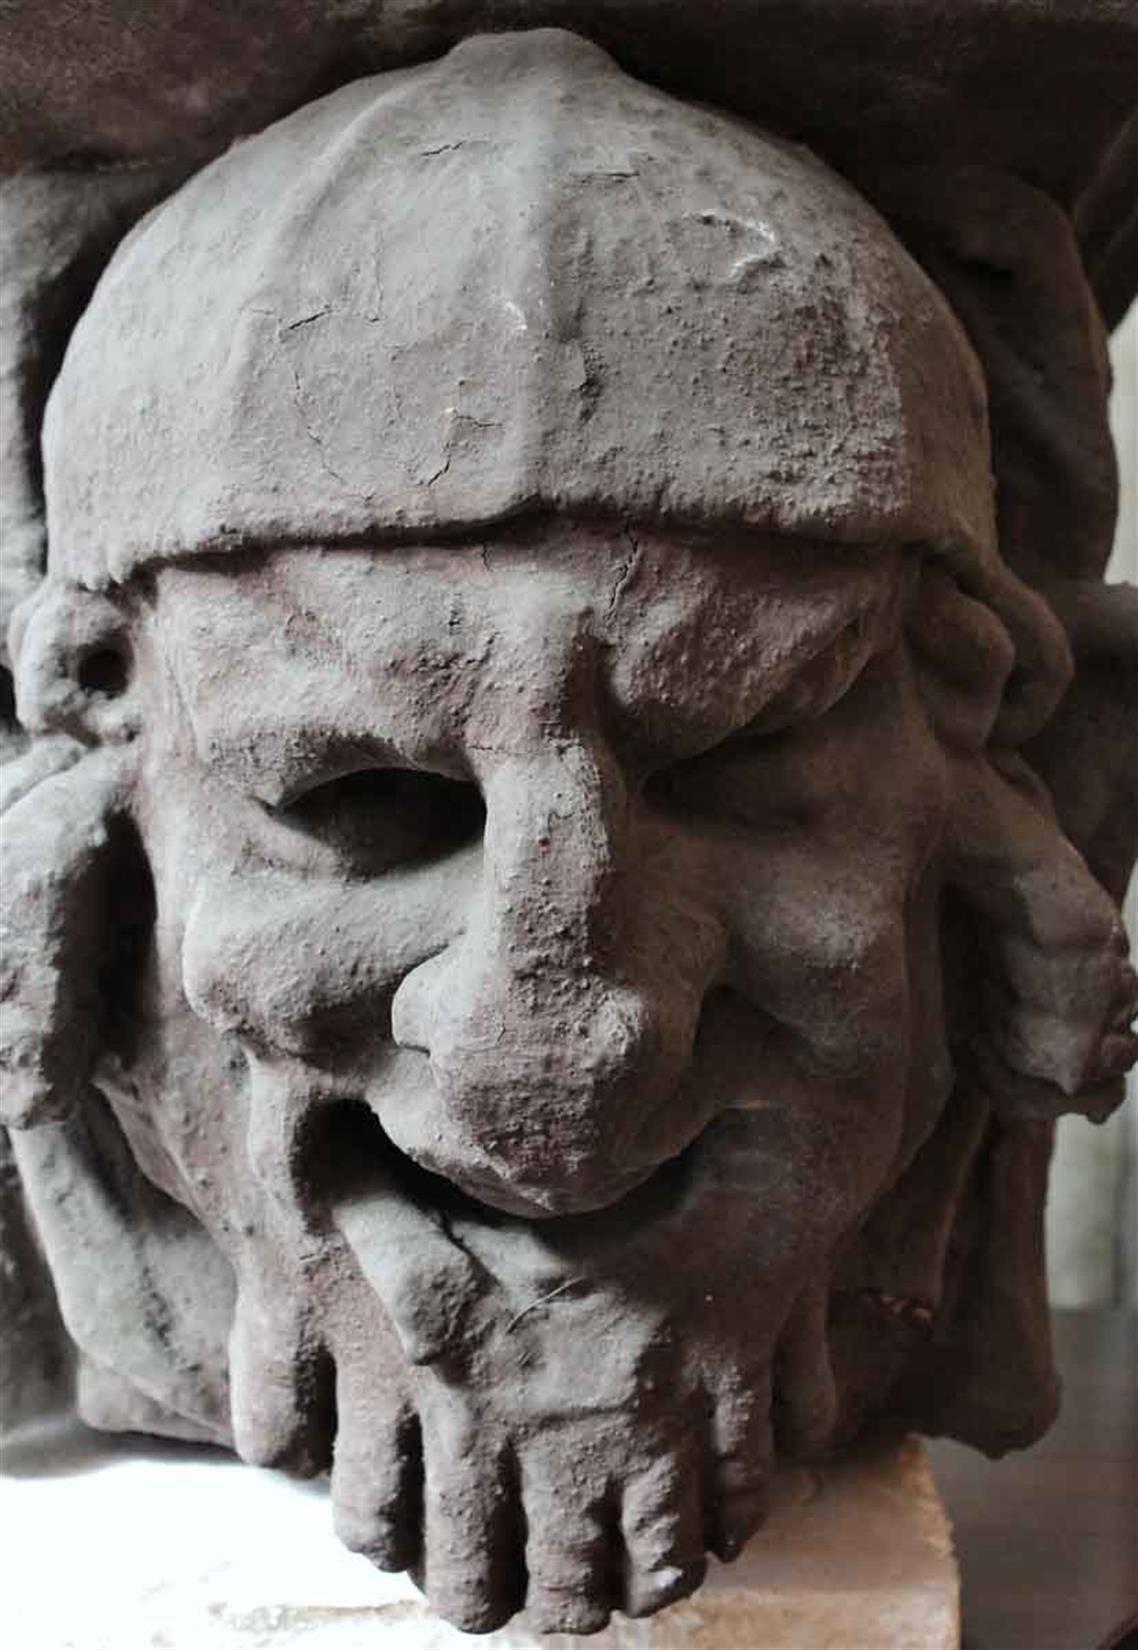 This plaster head is one of four that was part of the 1945 redesign of 564 5th Ave. New York City formerly known as the Euclid Building. 

Done by Beverly King in accordance with the wishes of J.L. Goodman who an exclusive men's store there.